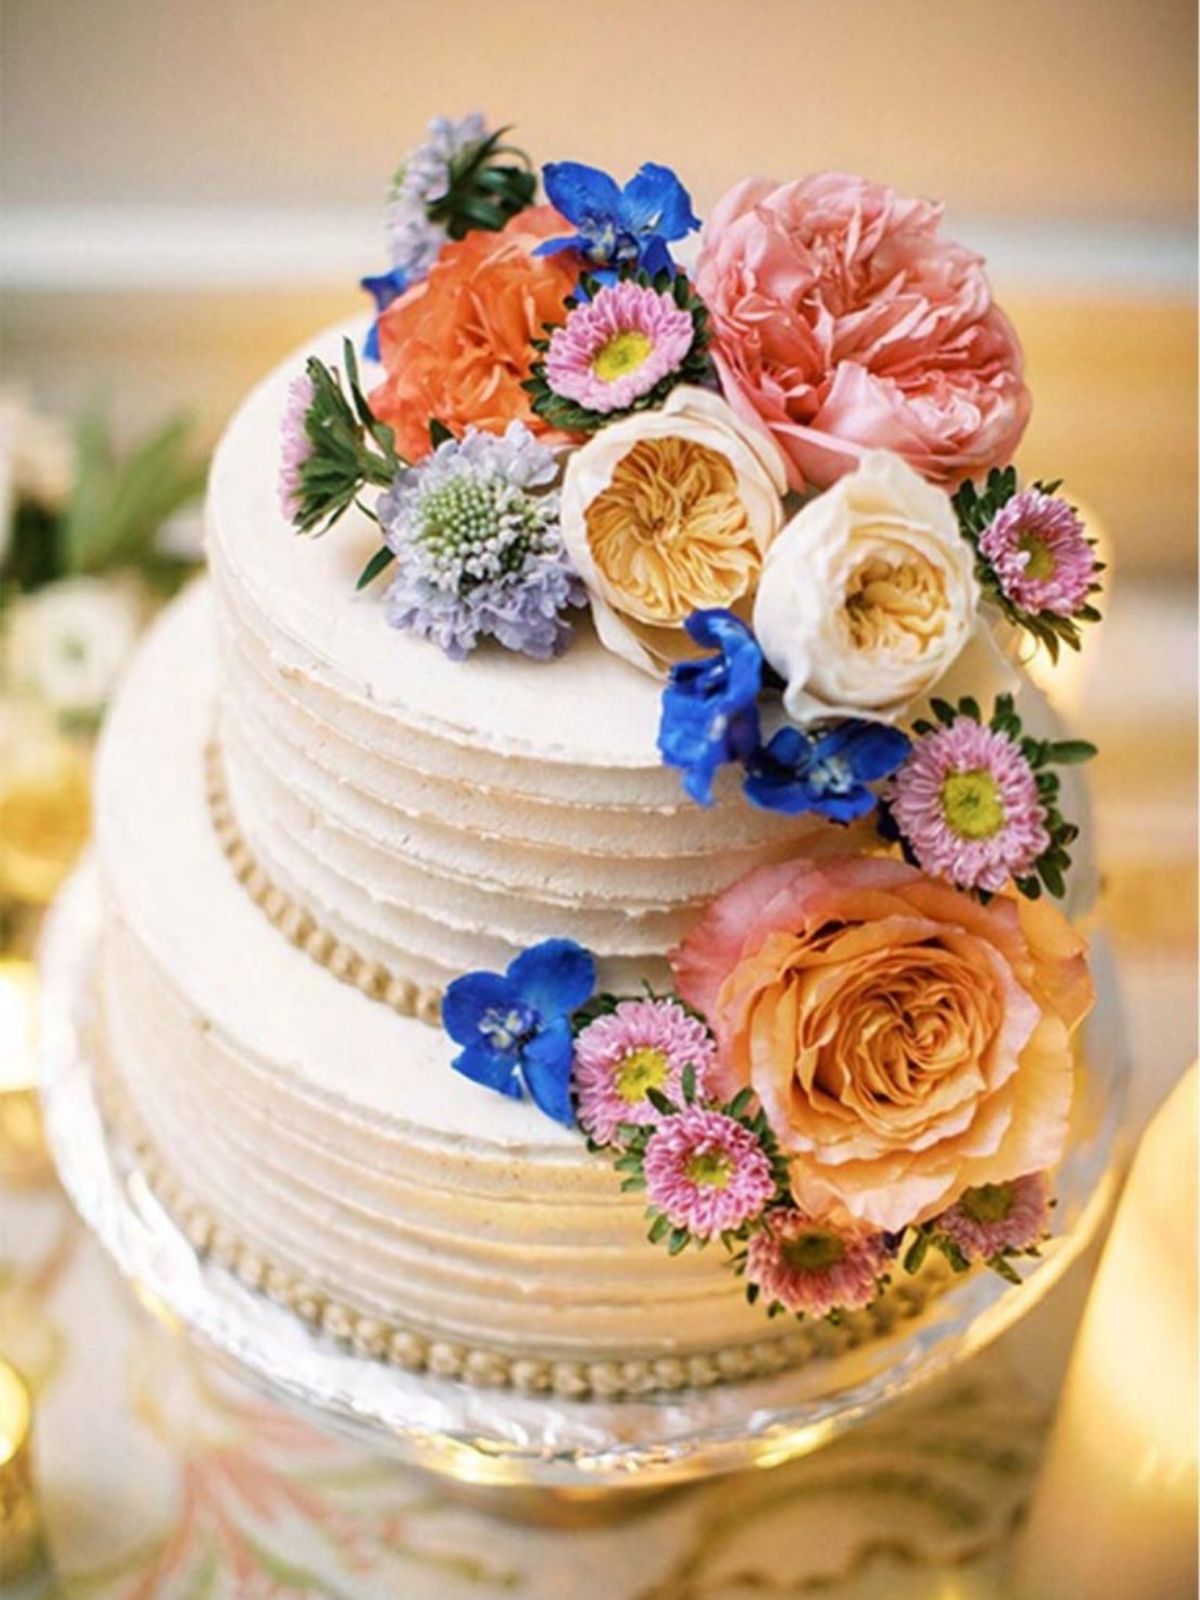 Wedding cake flowers - florists review contest 2021 - Carrie Wilcox - on thursd